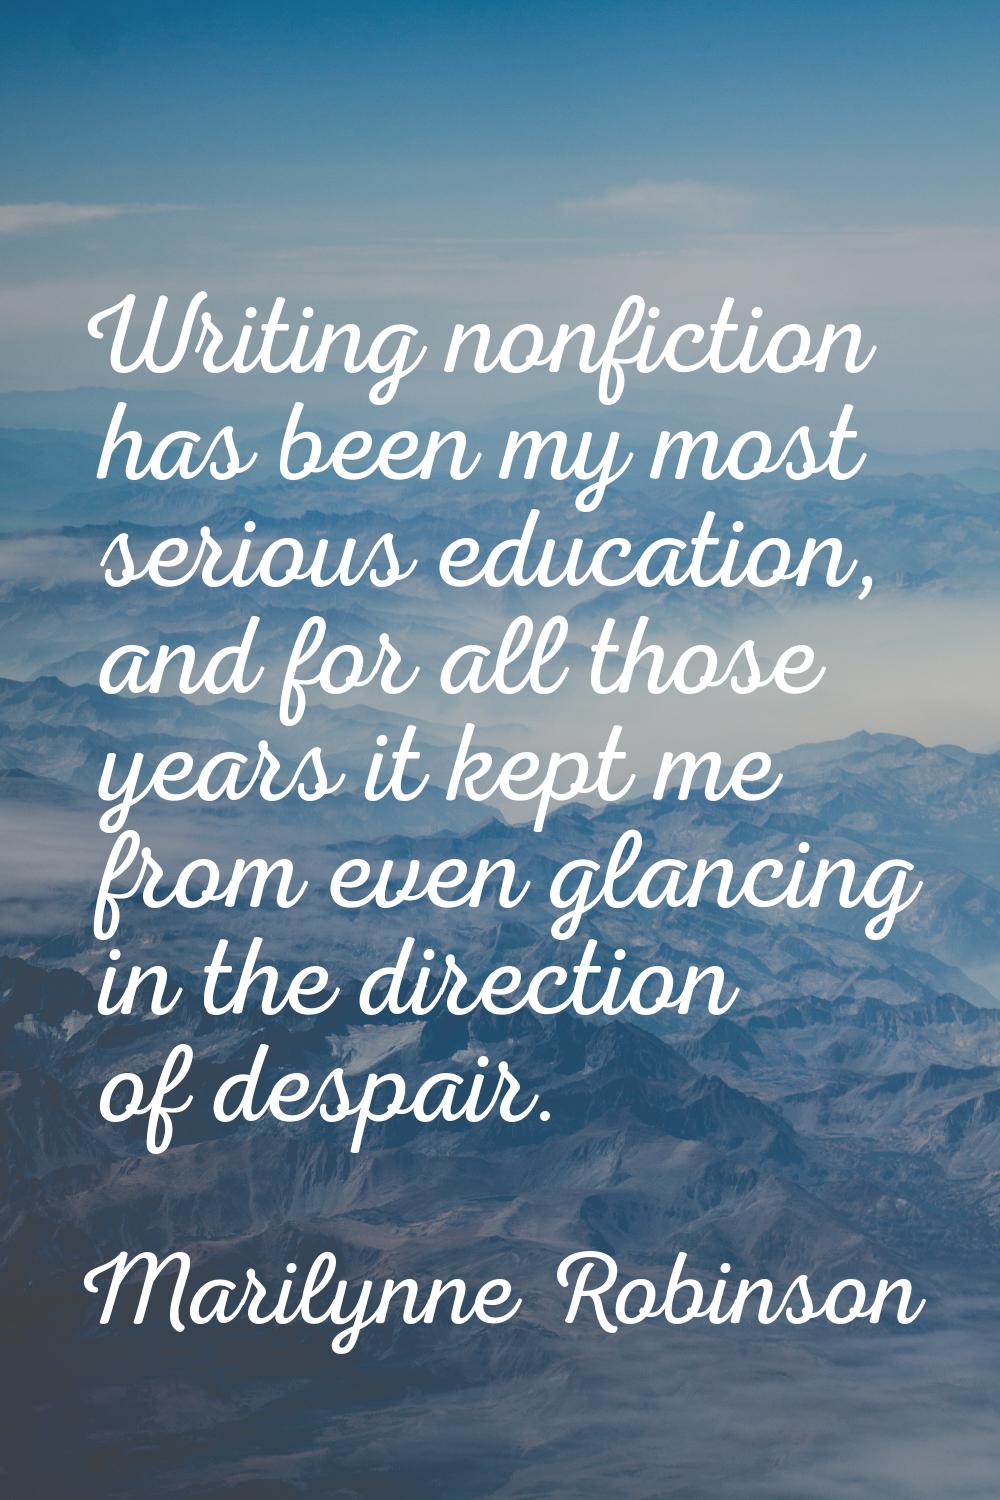 Writing nonfiction has been my most serious education, and for all those years it kept me from even